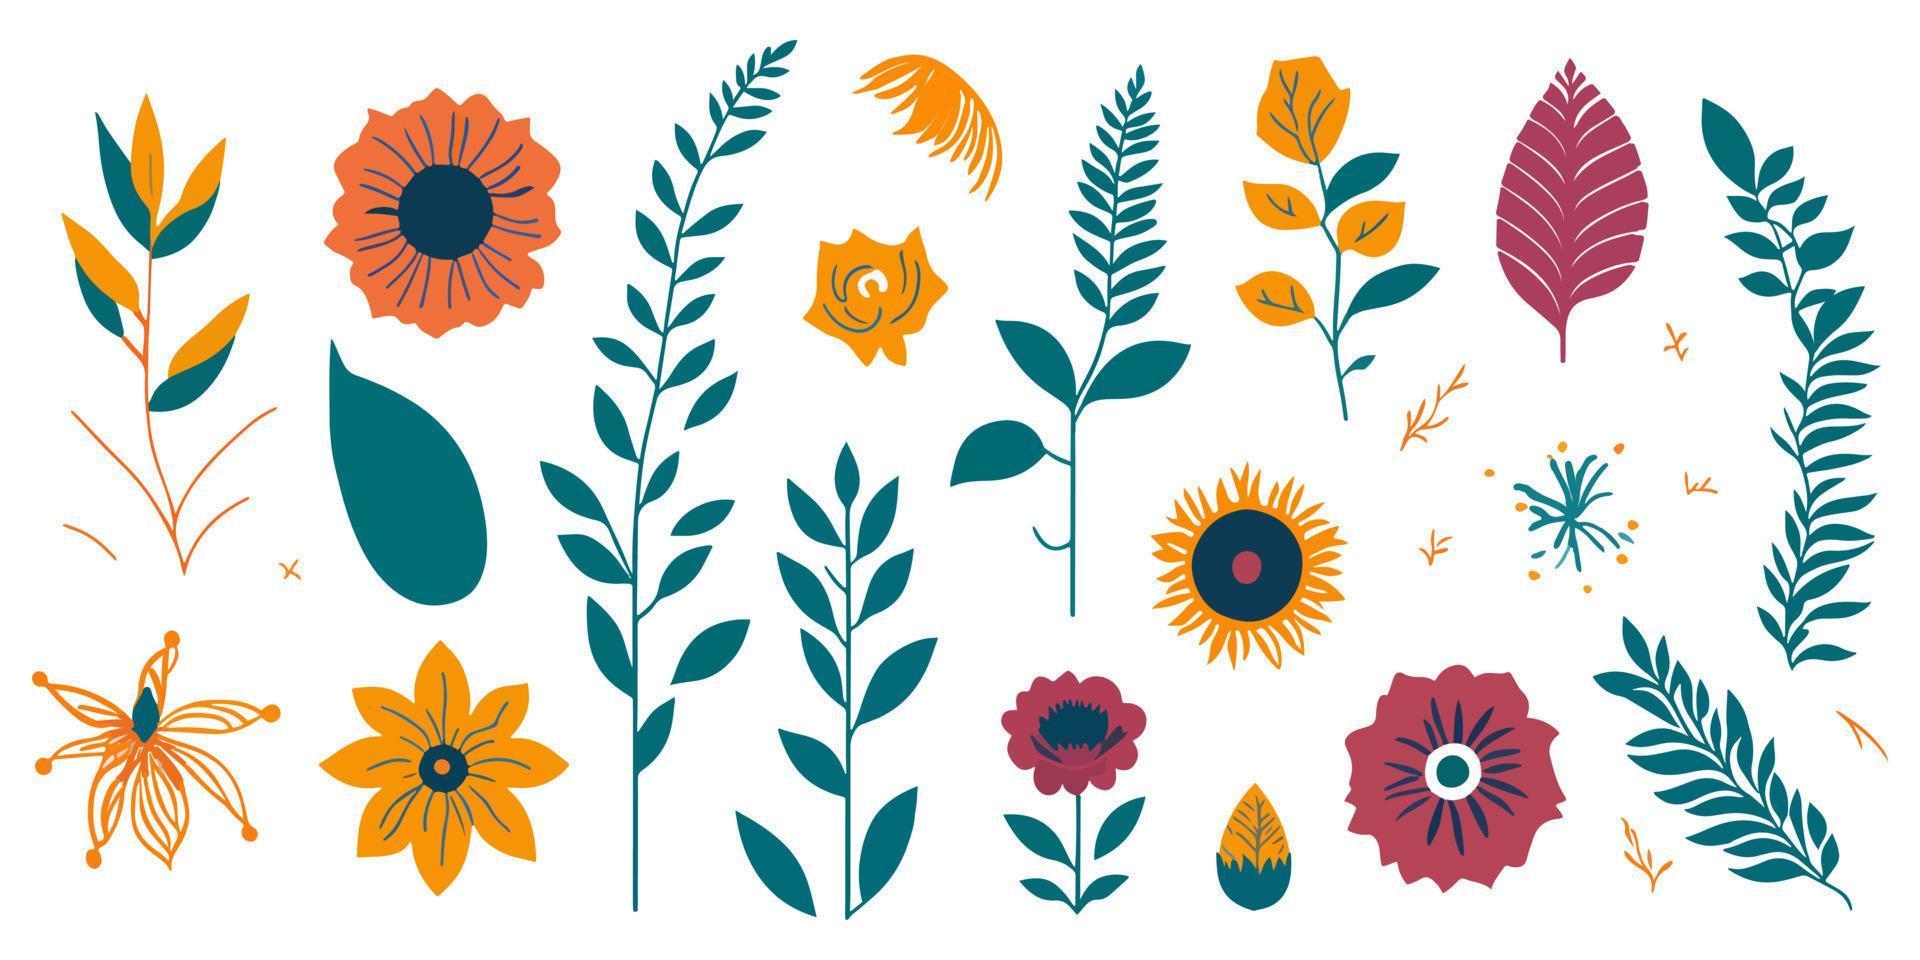 Botanical Isolated Illustrations. Nature-inspired Art for Plant Lovers vector